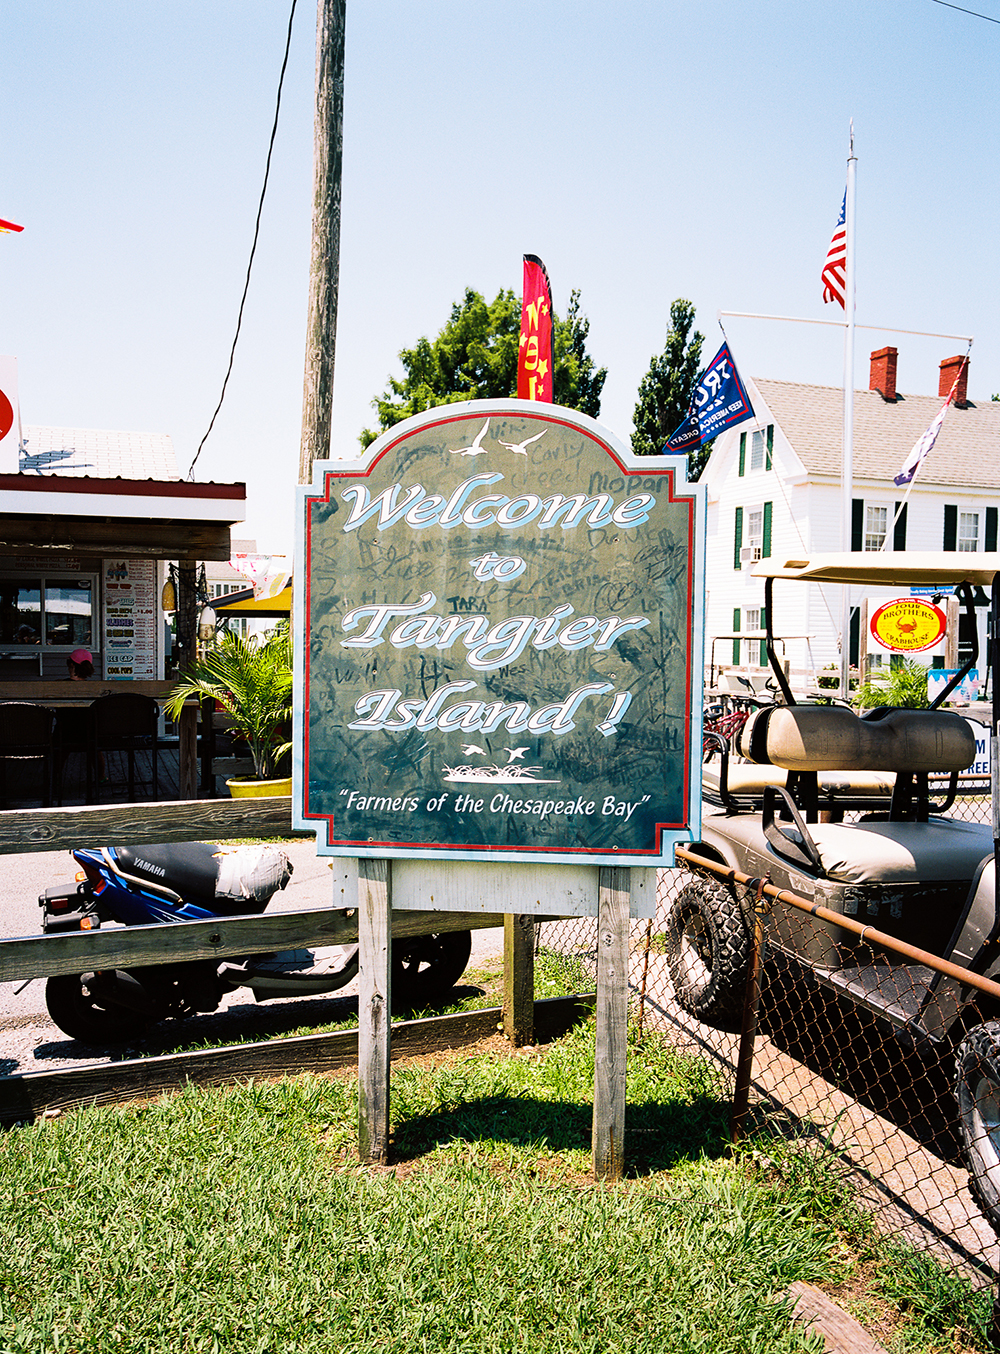 Photograph by Gunner Hughes of Tangier Island Welcome Sign